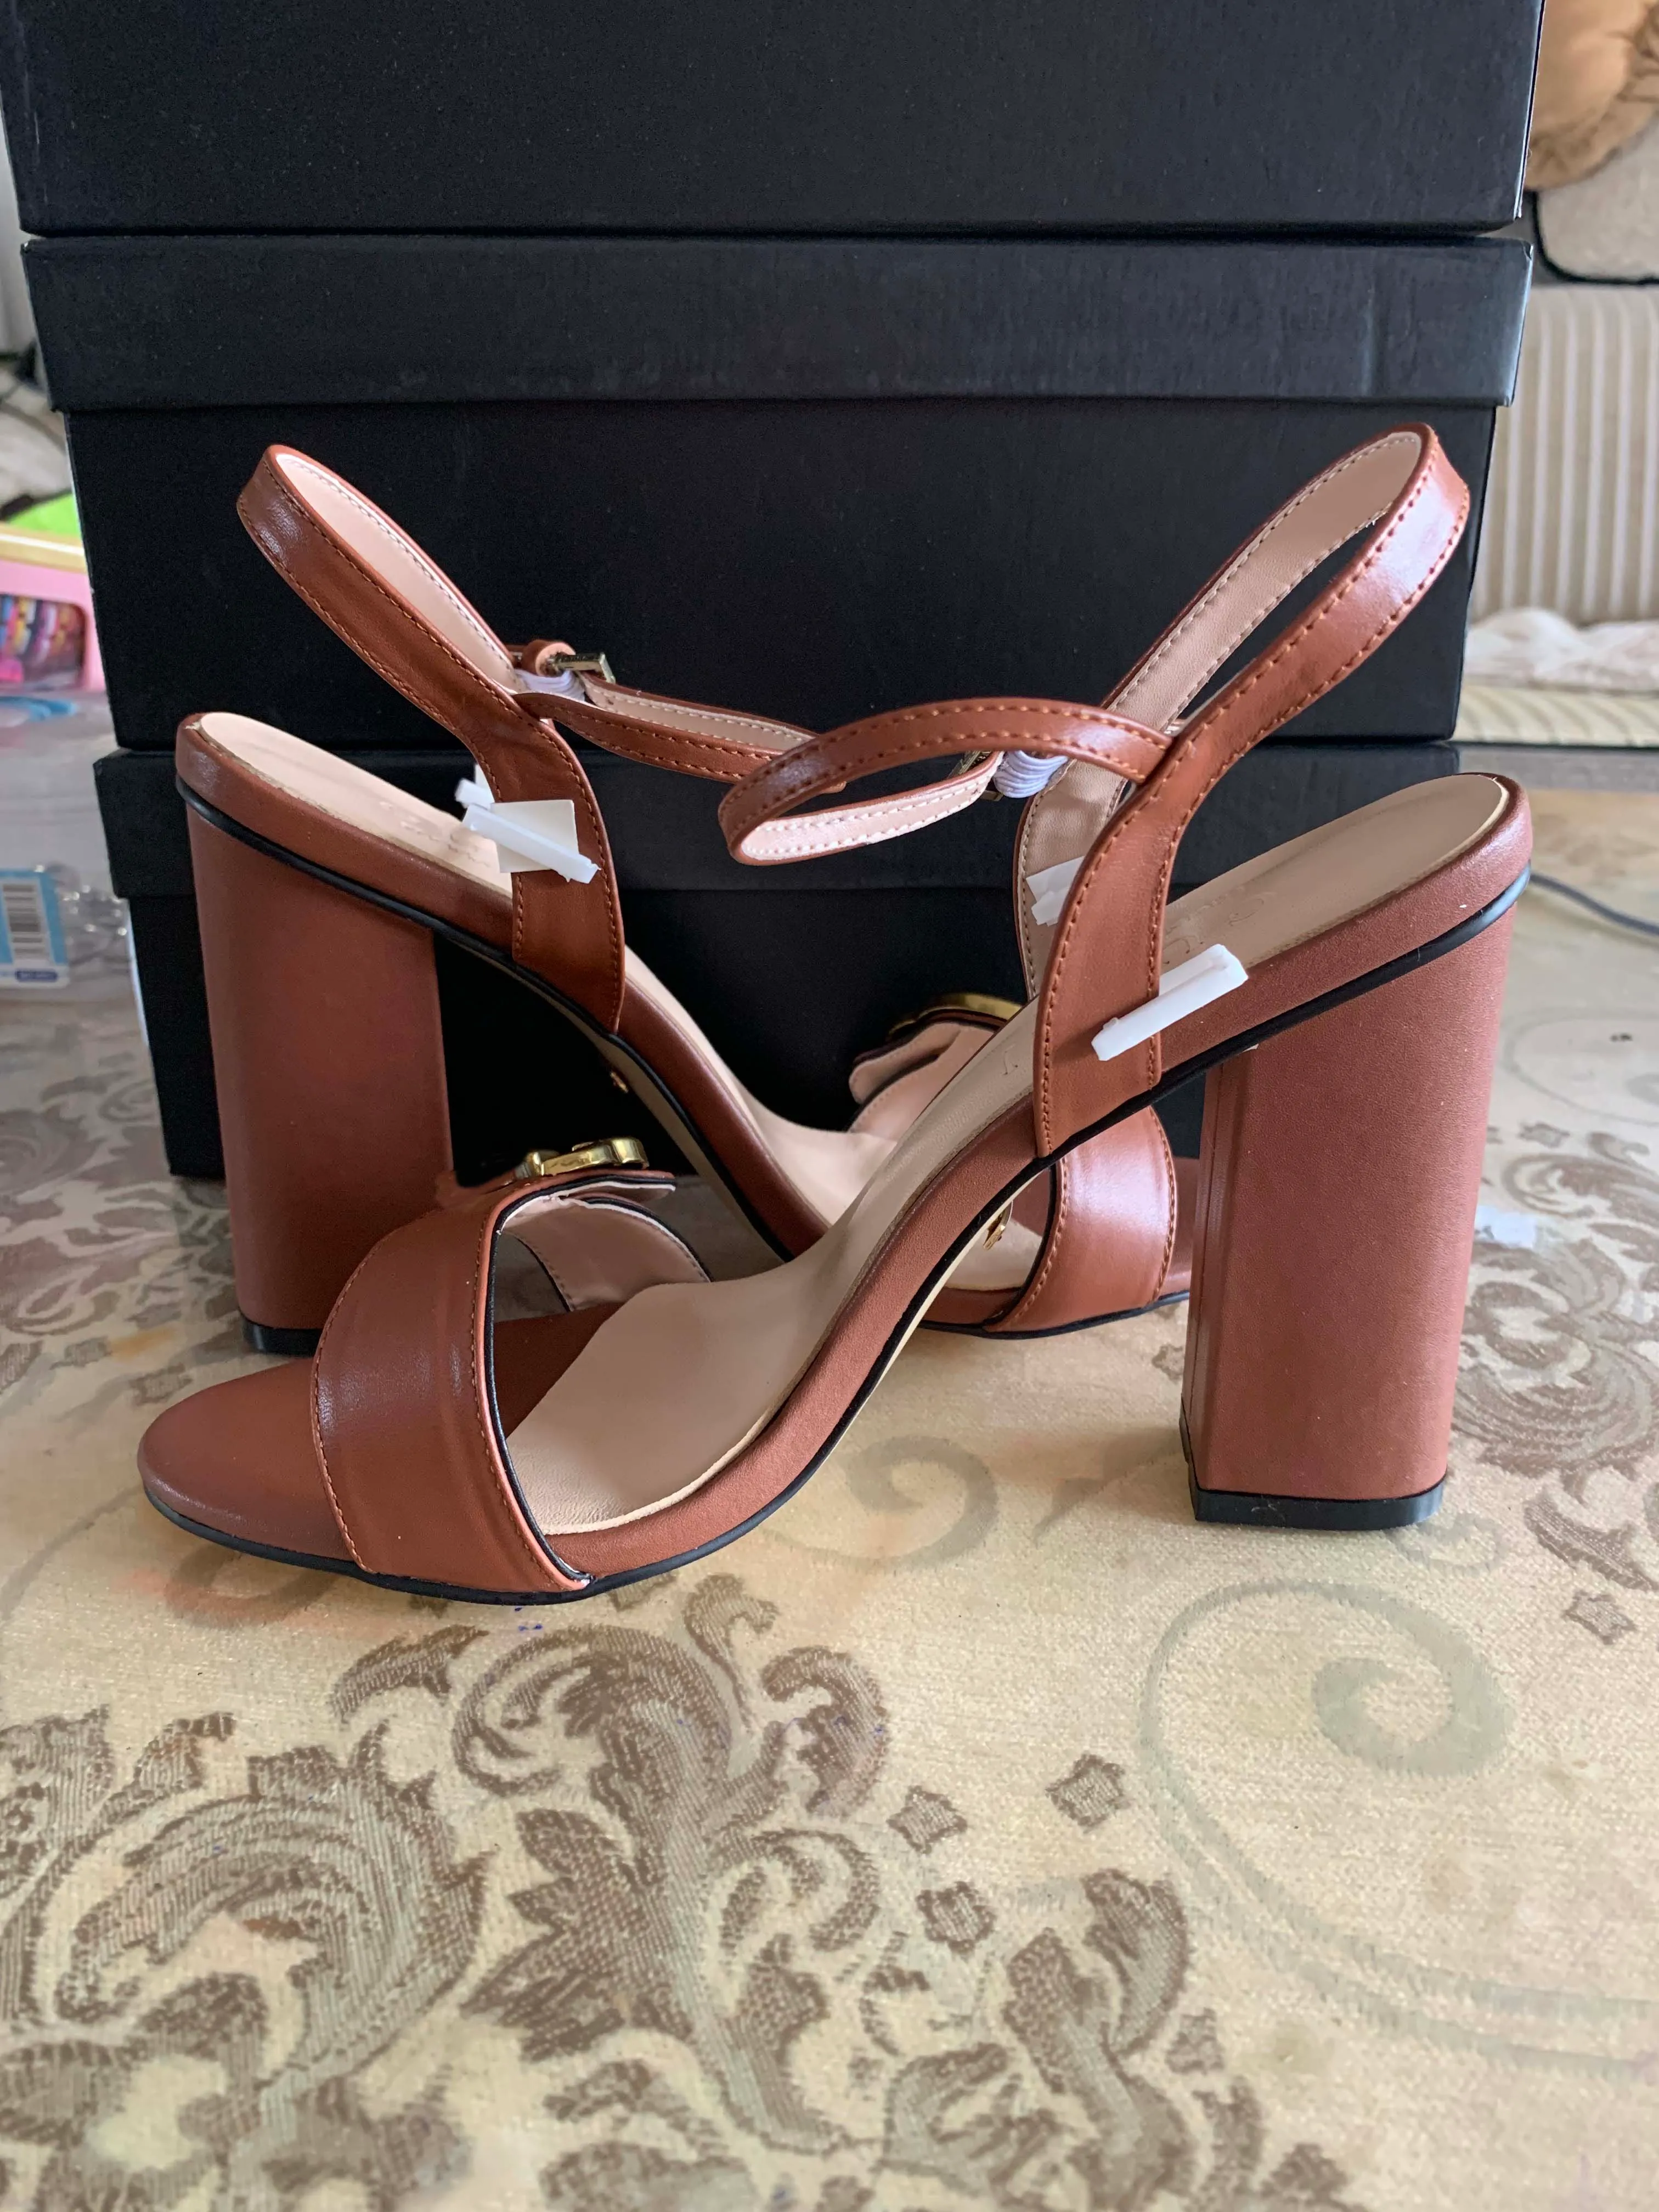 2022 Women design high heels sandals shoes girls fashion thin 11cm heel sexy pumps office lady casual dinner outdoor party ins soft leather sandal brown large size 41